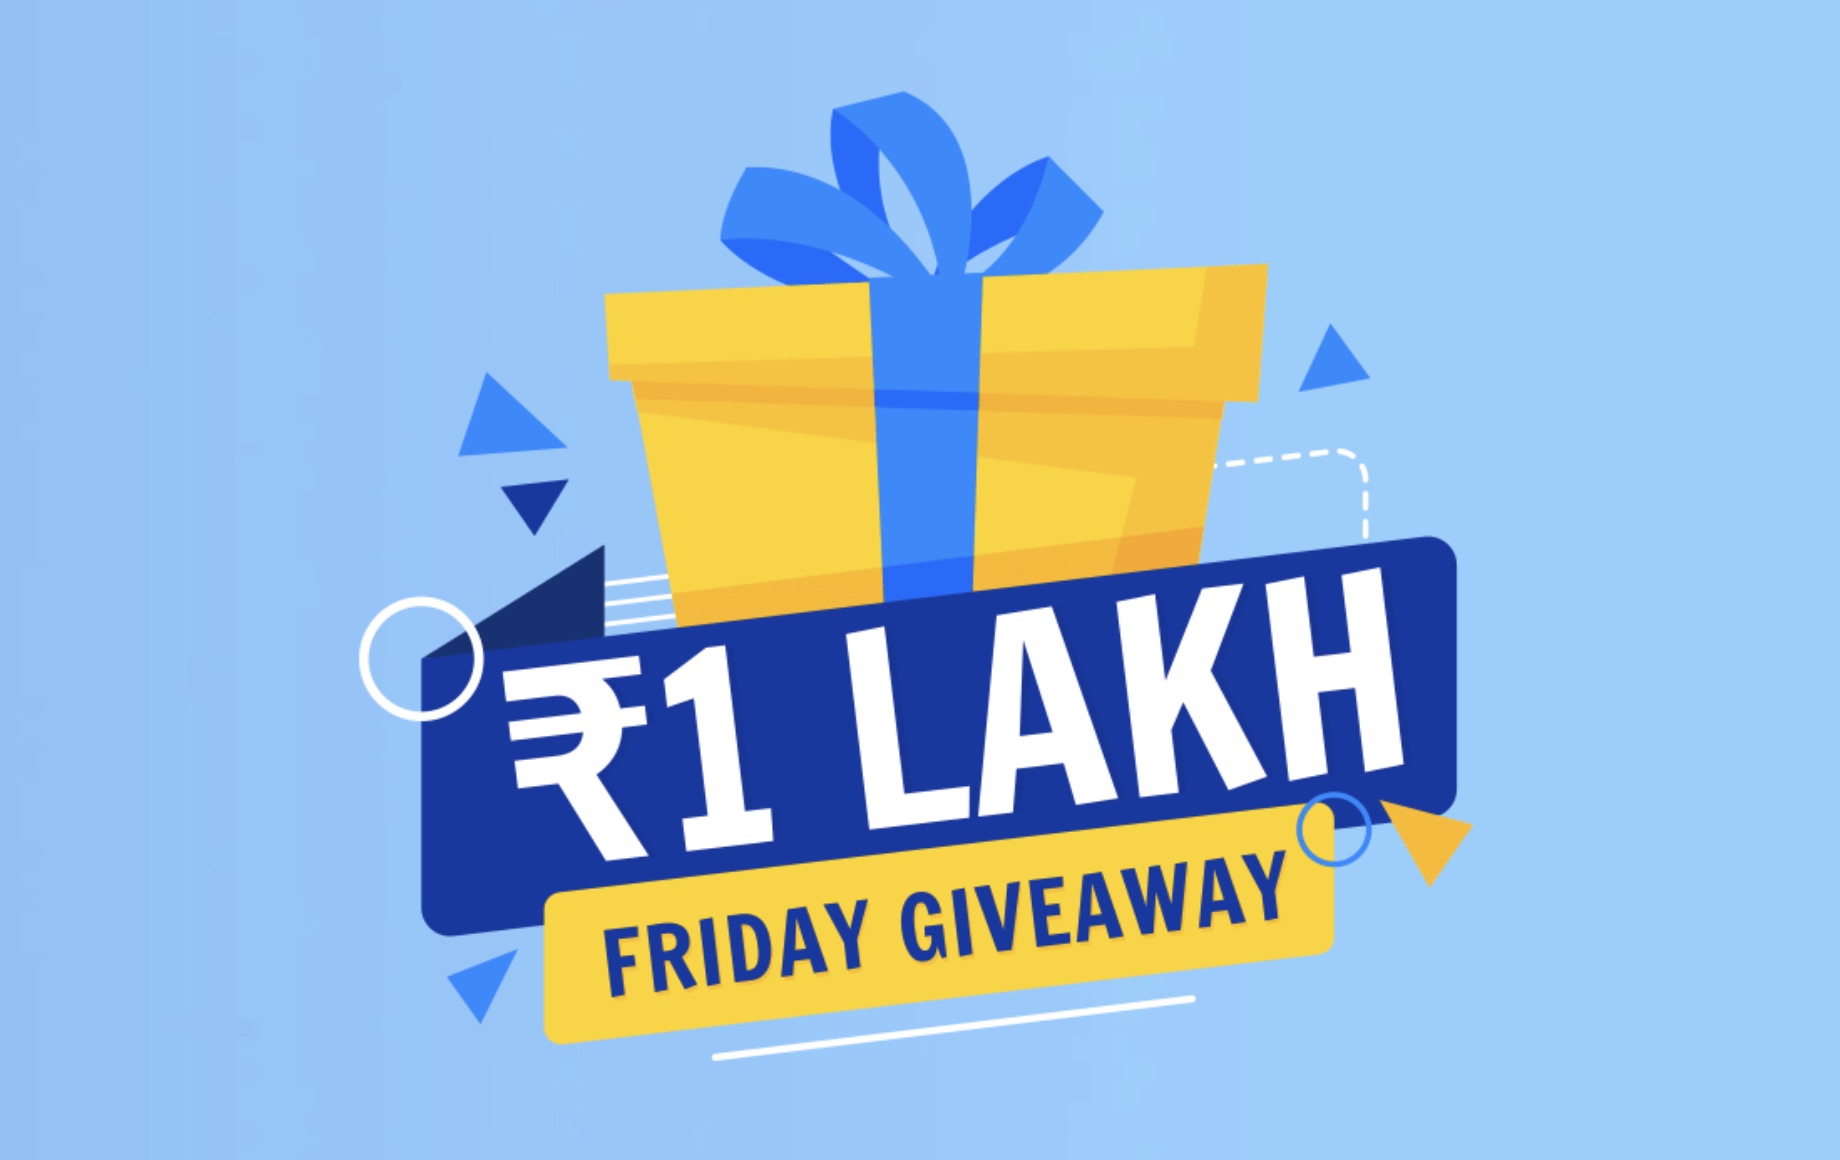 ComeOn Friday Giveaway Promotion